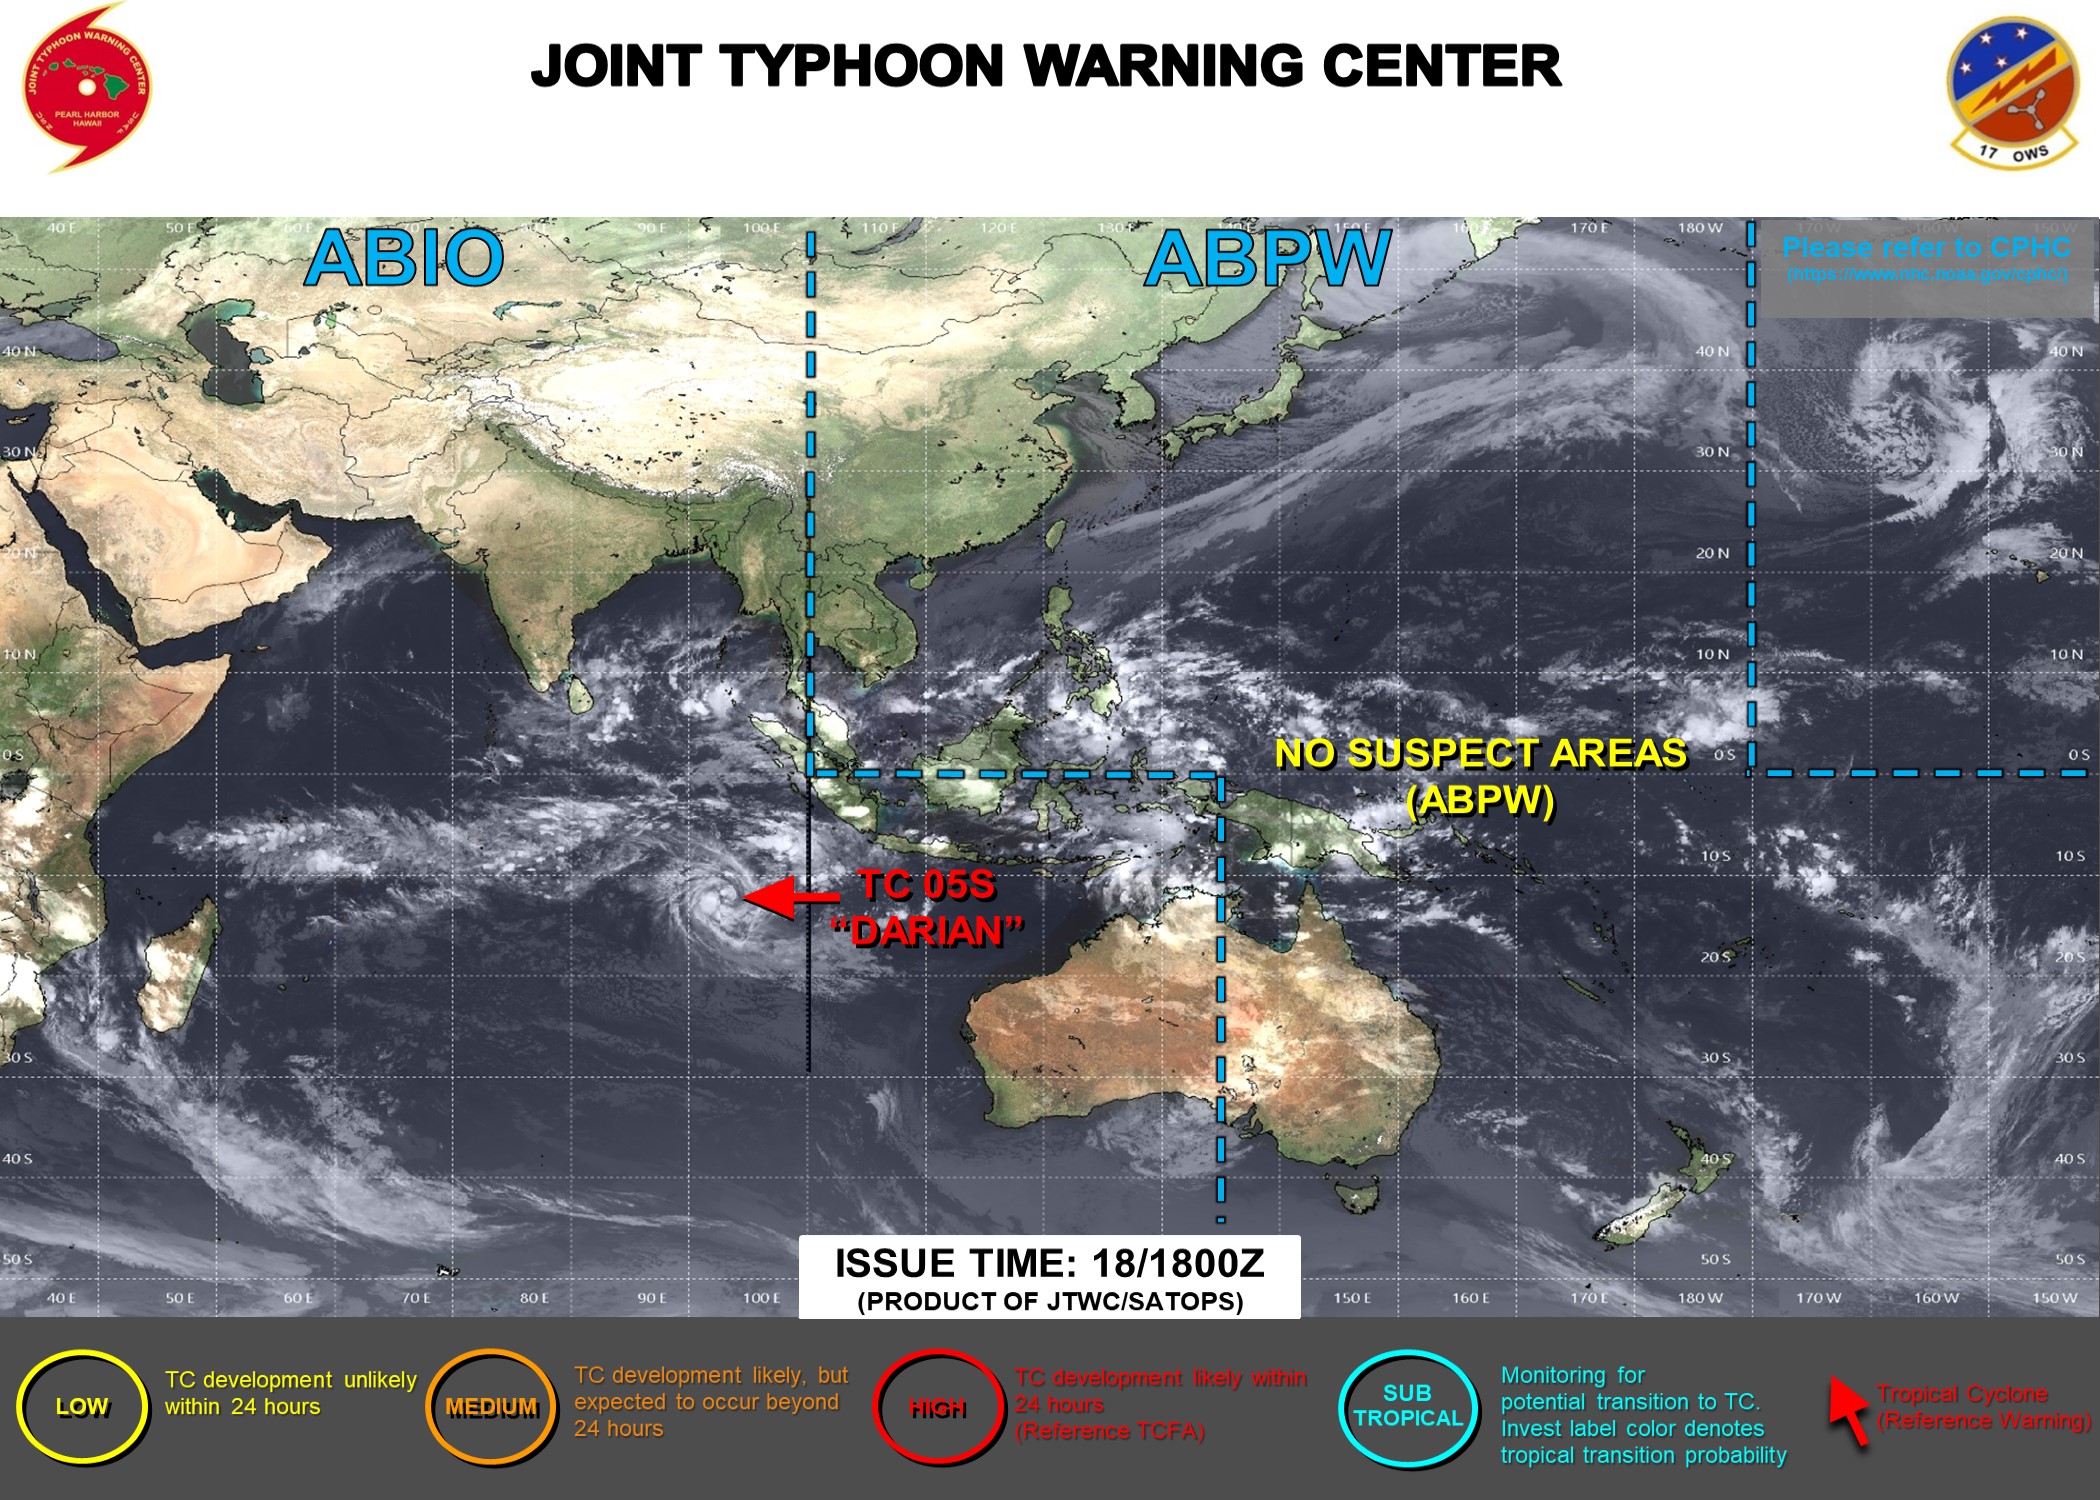 JTWC IS ISSUING 12HOURLY WARNINGS AND 3HOURLY SATELLITE BULLETINS ON TC 05S(DARIAN). 3HOURLY SATELLITE BULLETINS WERE DISCONTINUED ON THE REMNANTS OF TC 07A AT 18/0815UTC.